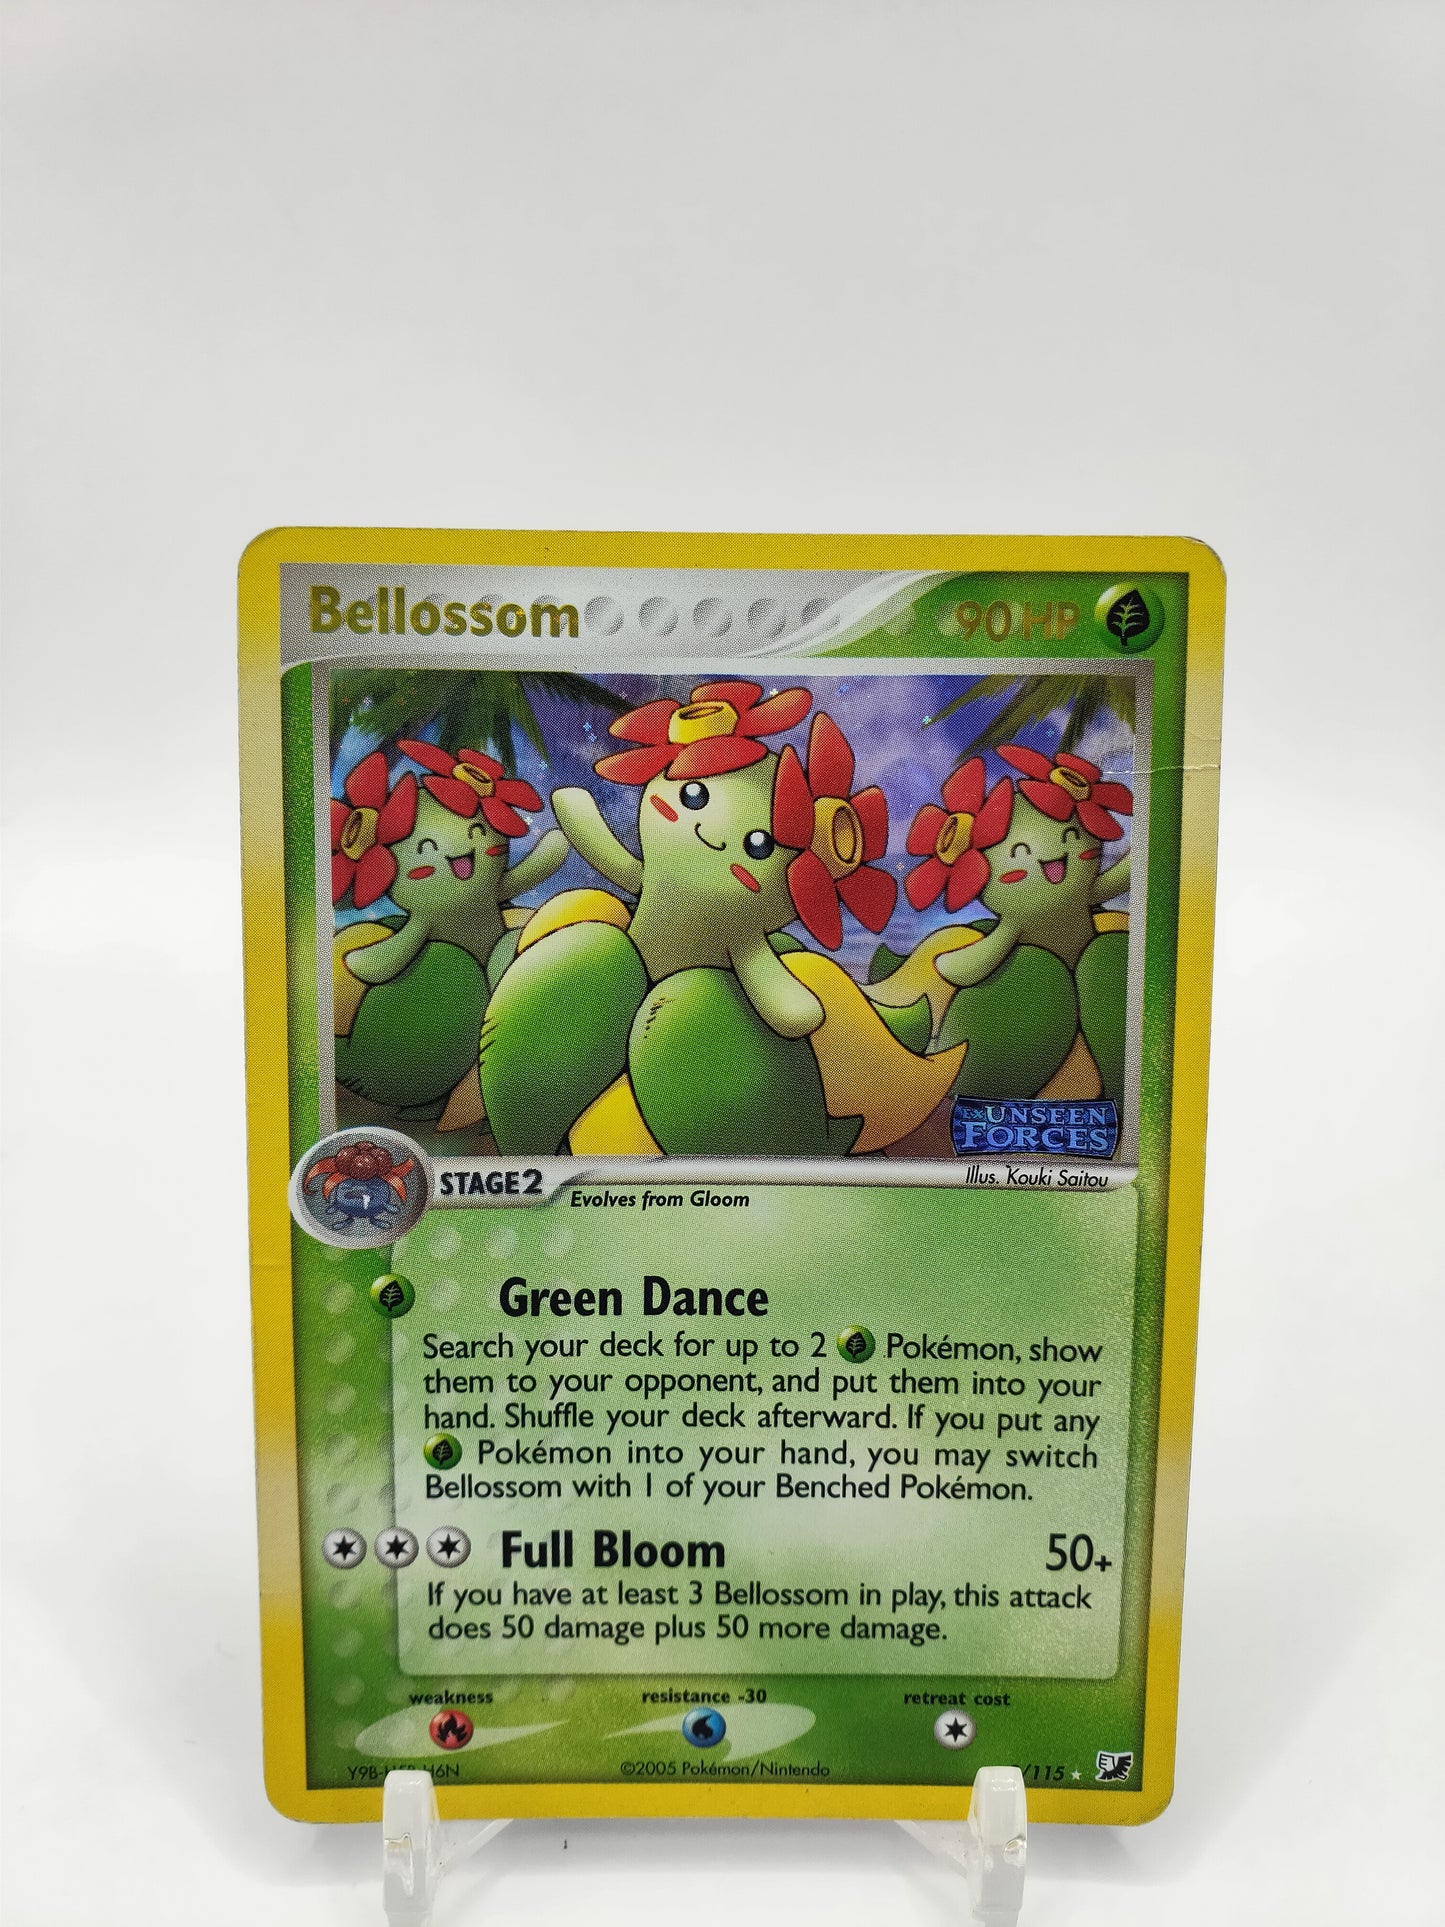 Bellossom Reverse Holo Rare Stamped Unseen Forces 3/115